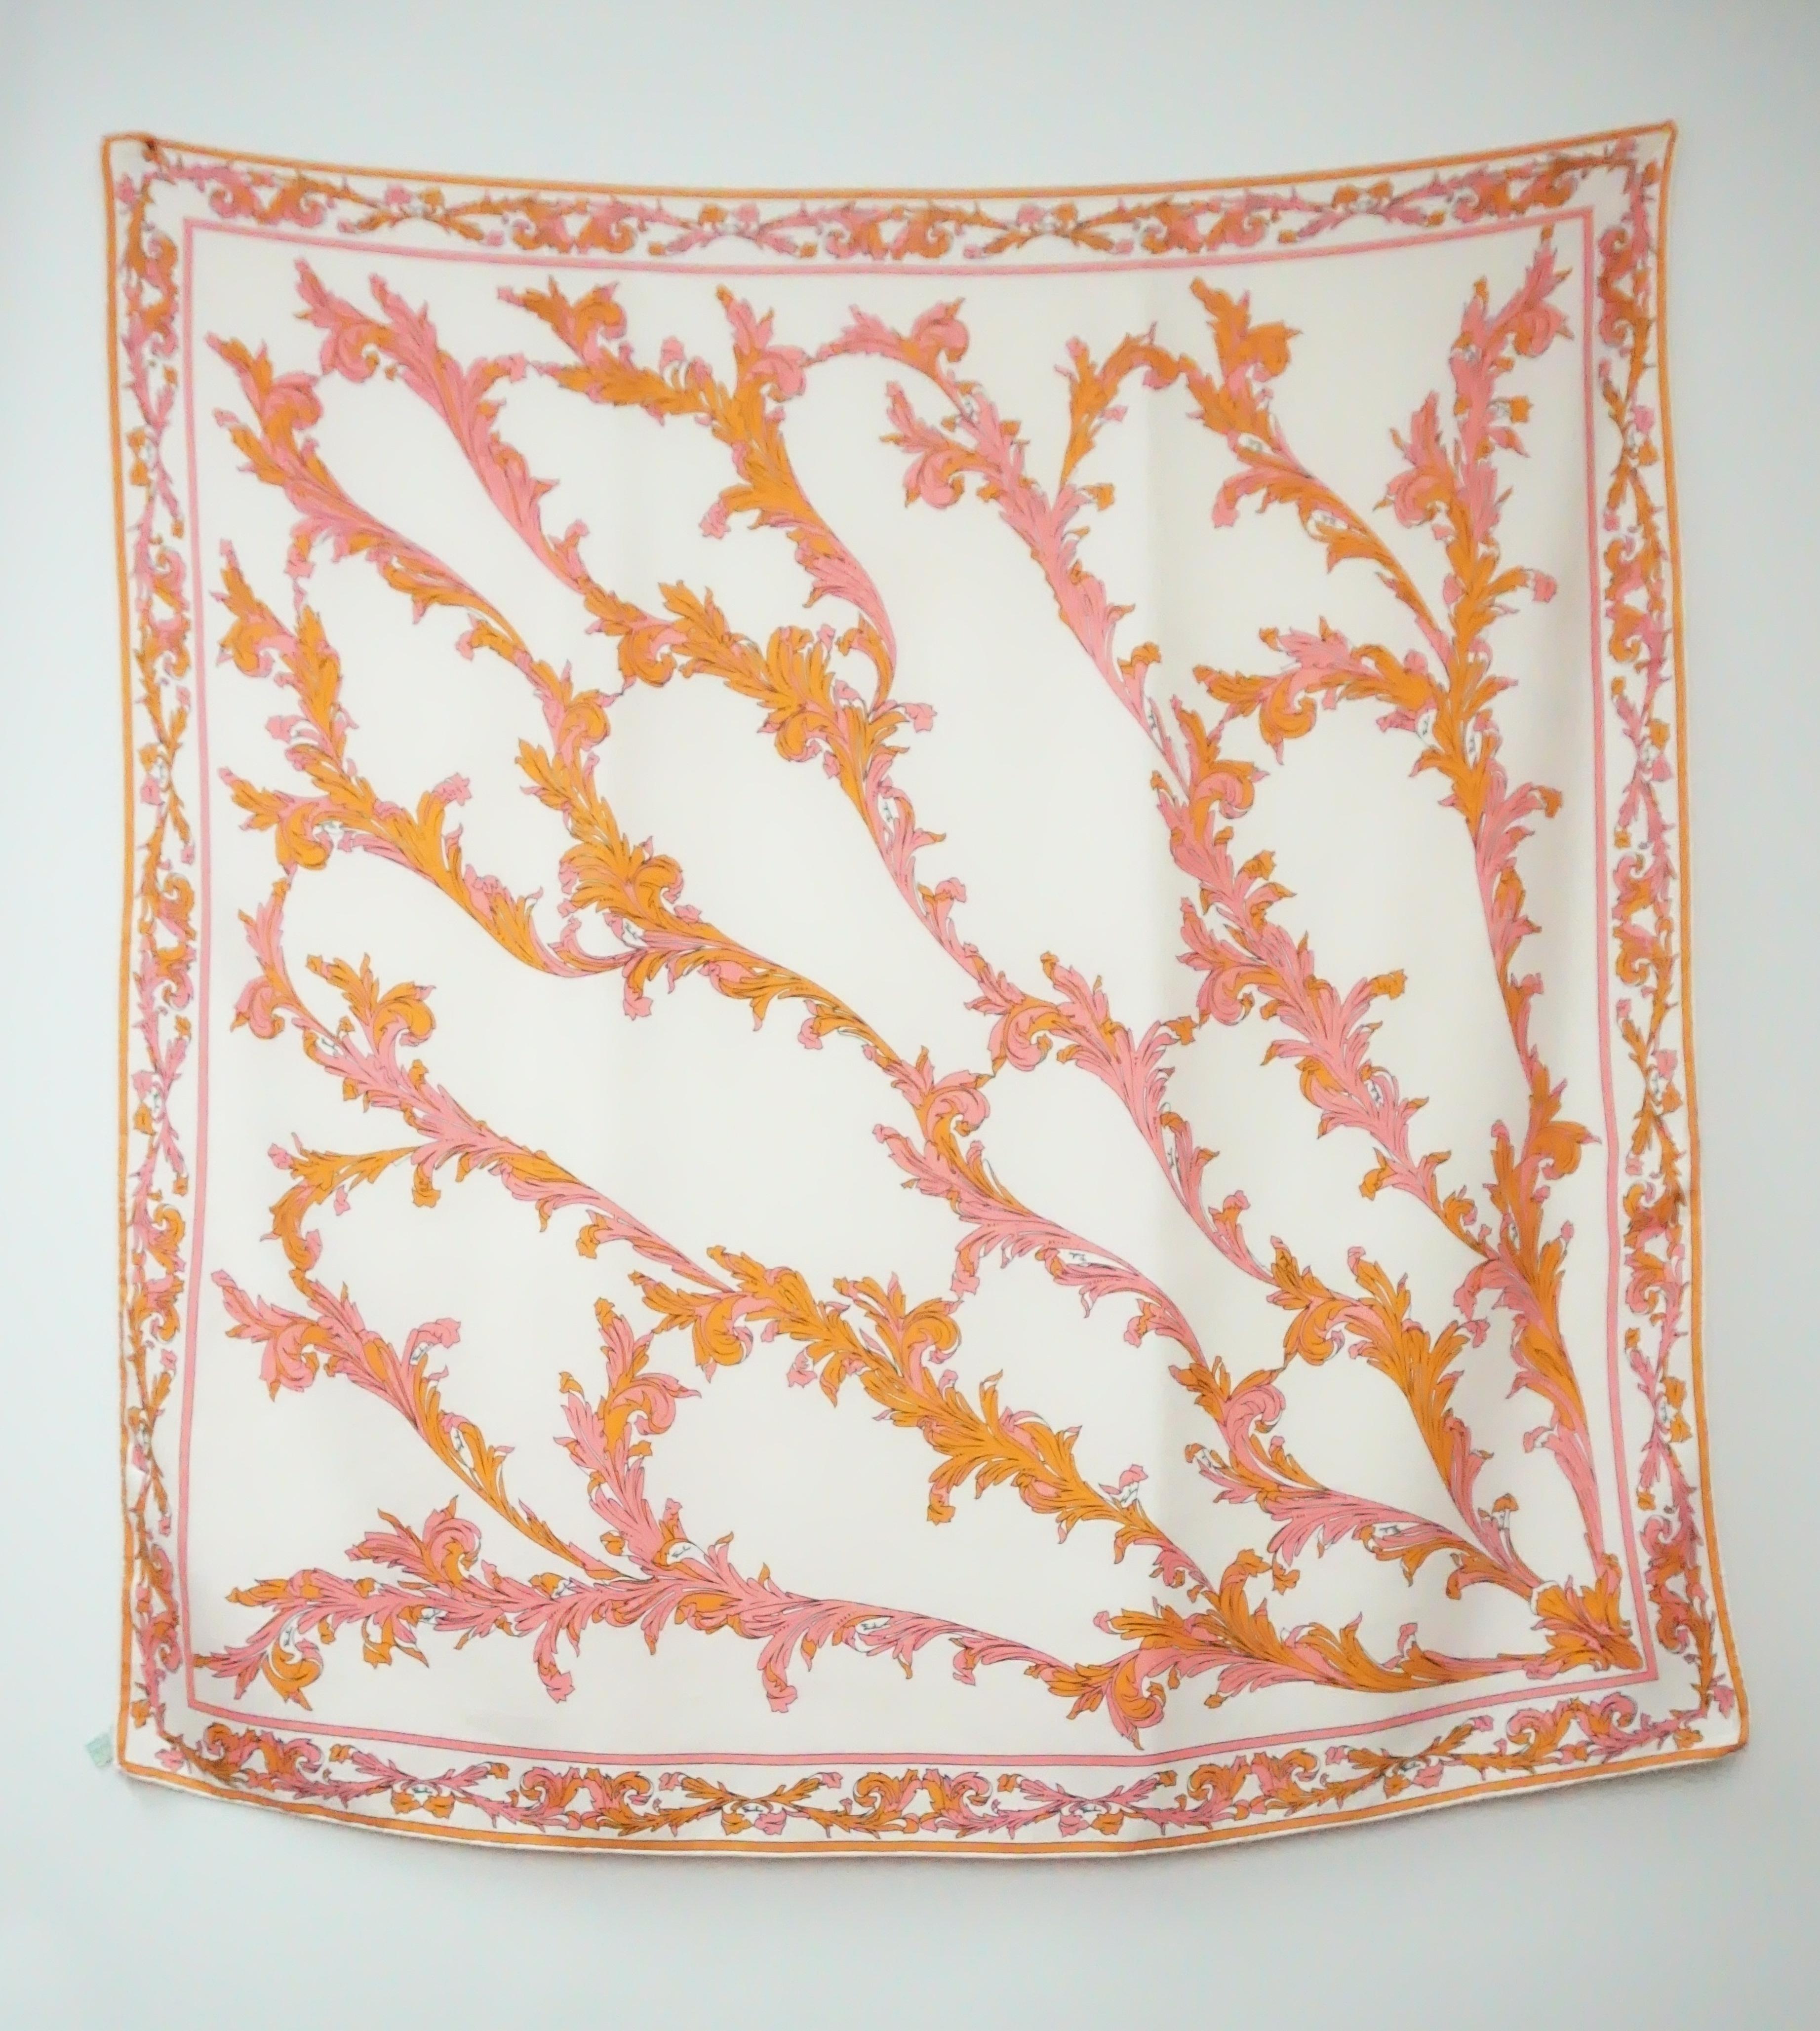 Emilio Pucci Vintage Pink and Orange Print Silk Scarf  - Circa 70's  This beautiful silk scarf is in excellent vintage condition. There is a beautiful leaf like pattern throughout the scarf that continues through the boarder. 
Measurements 
Height: